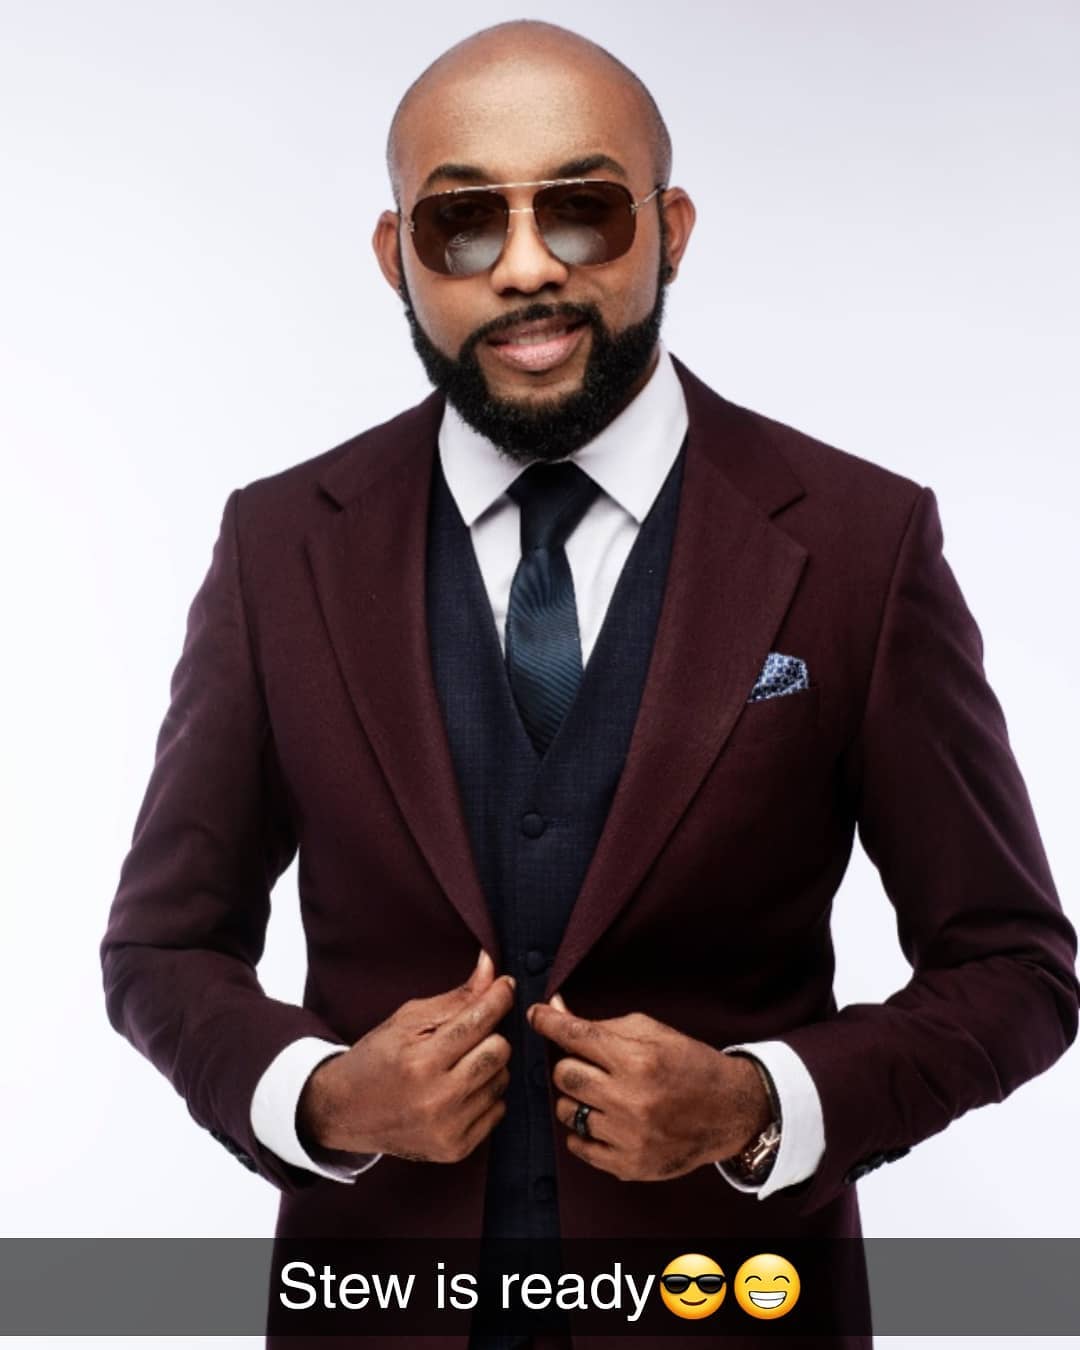 Banky W’s SUV car finally auctioned